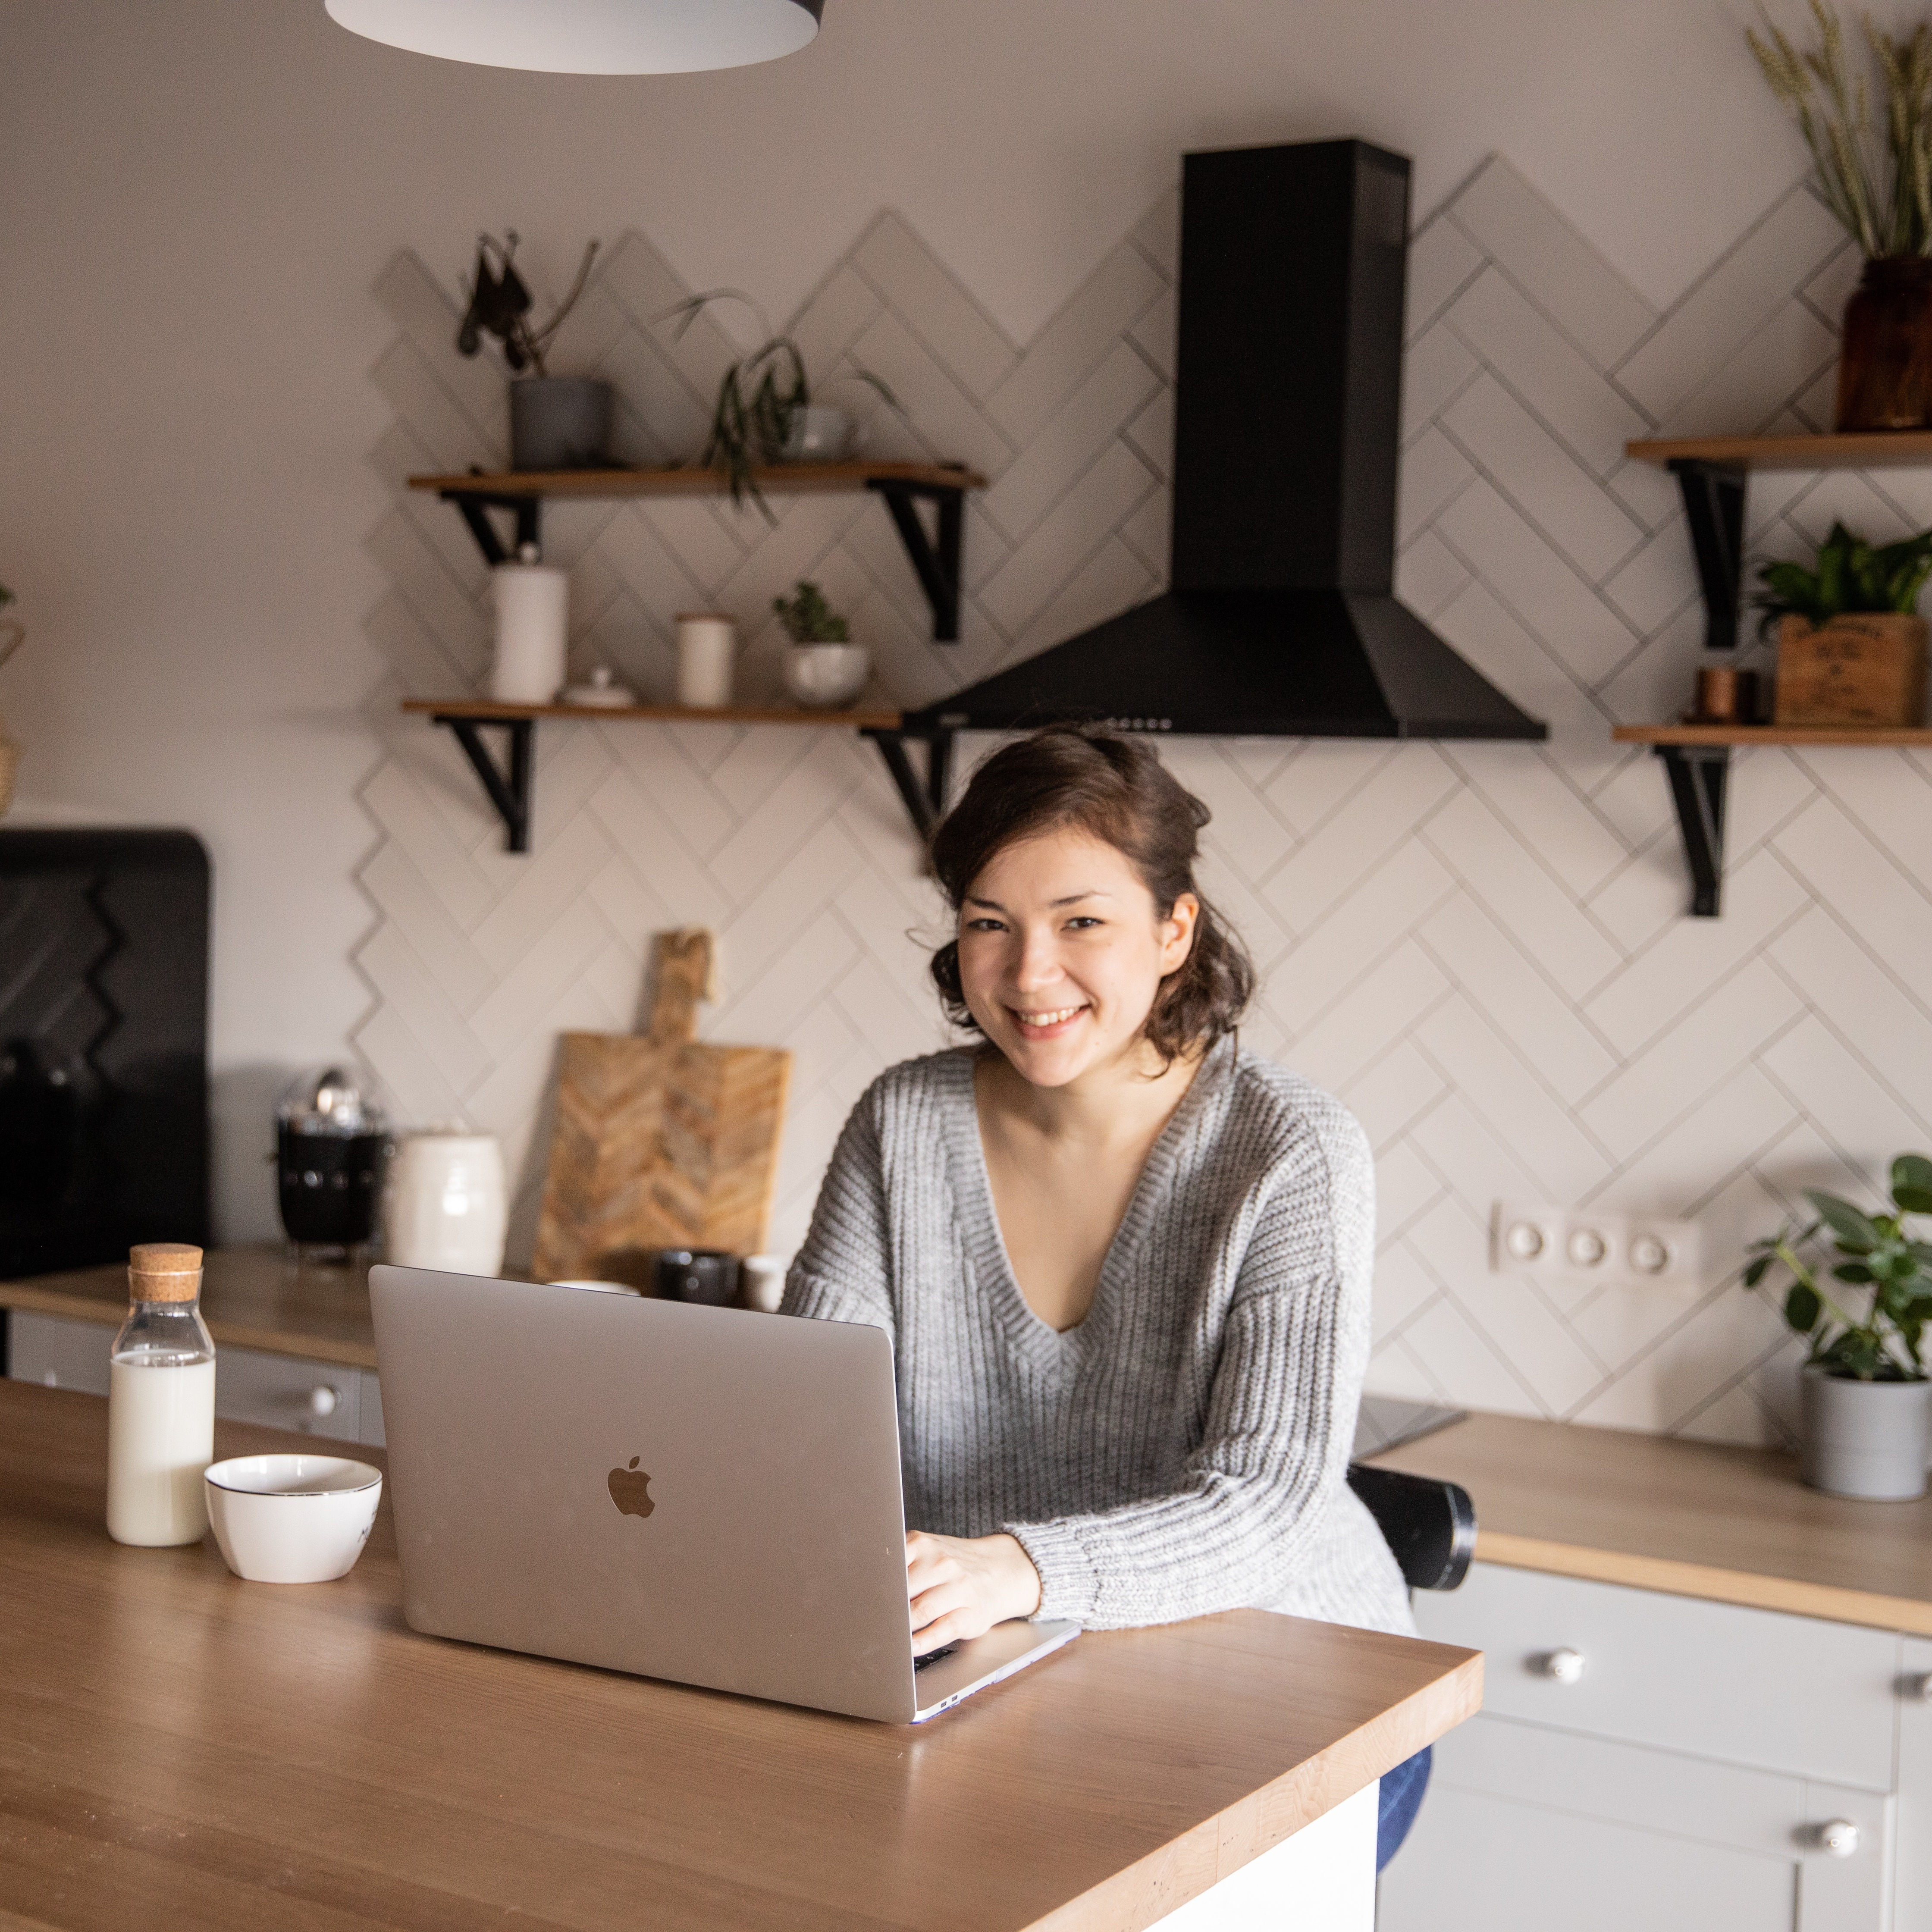 Lady in a grey jumper sitting at her kitchen counter typing on a laptop